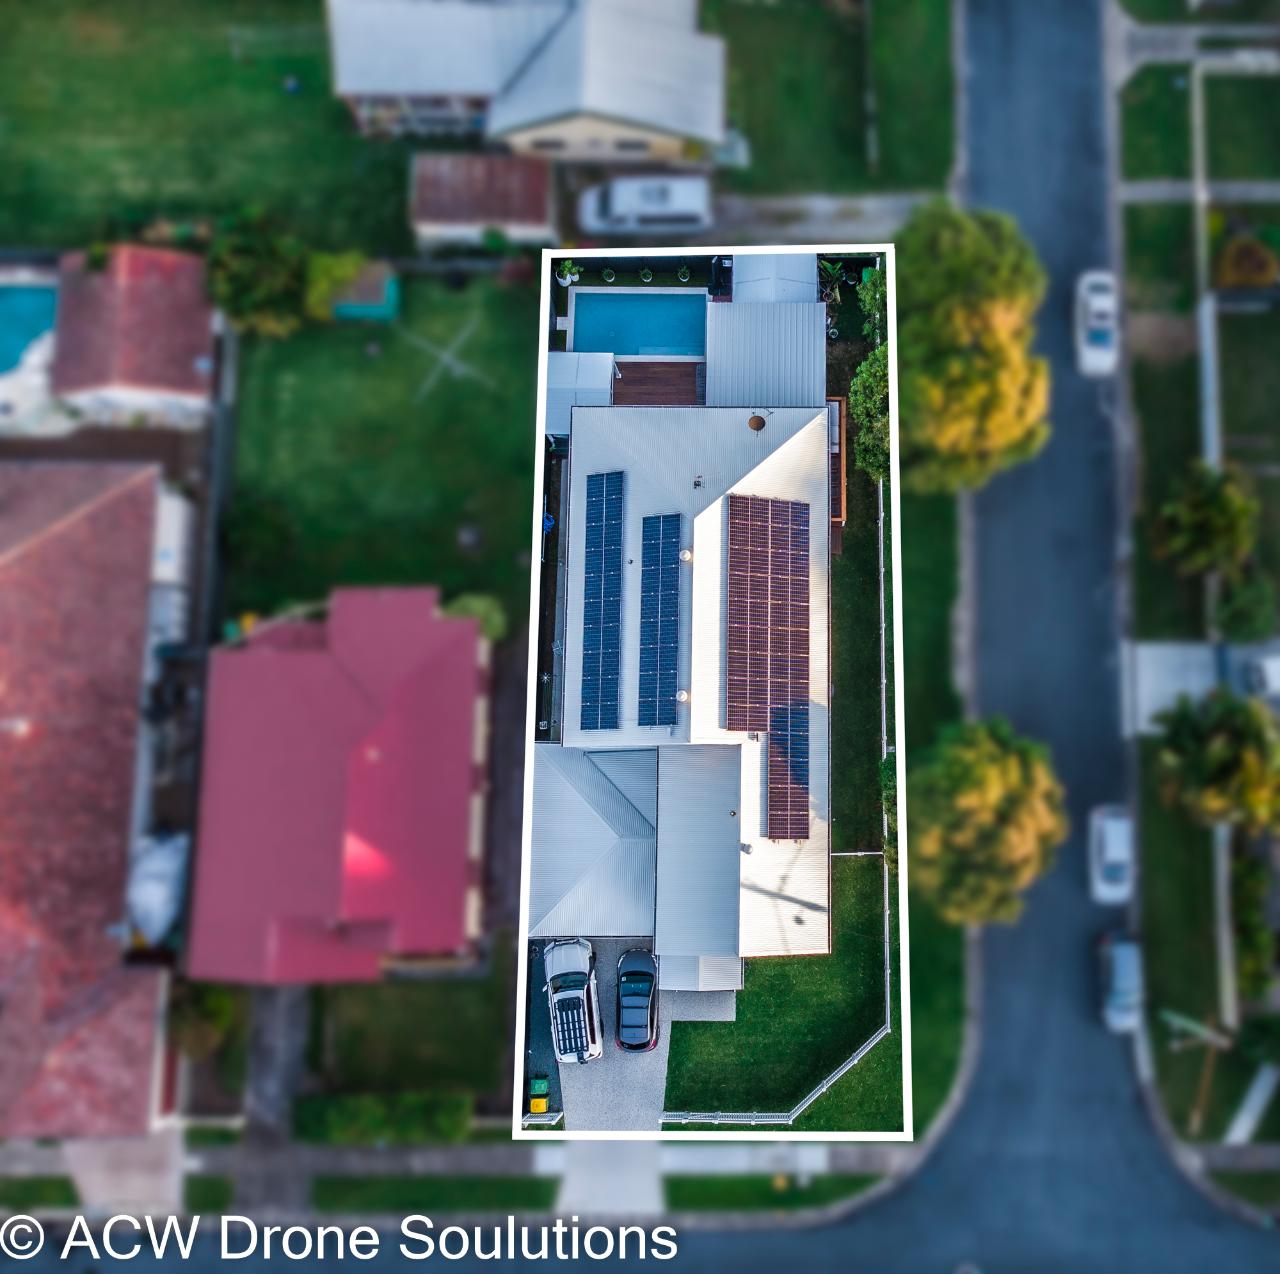 ACW DRONE SOLUTIONS